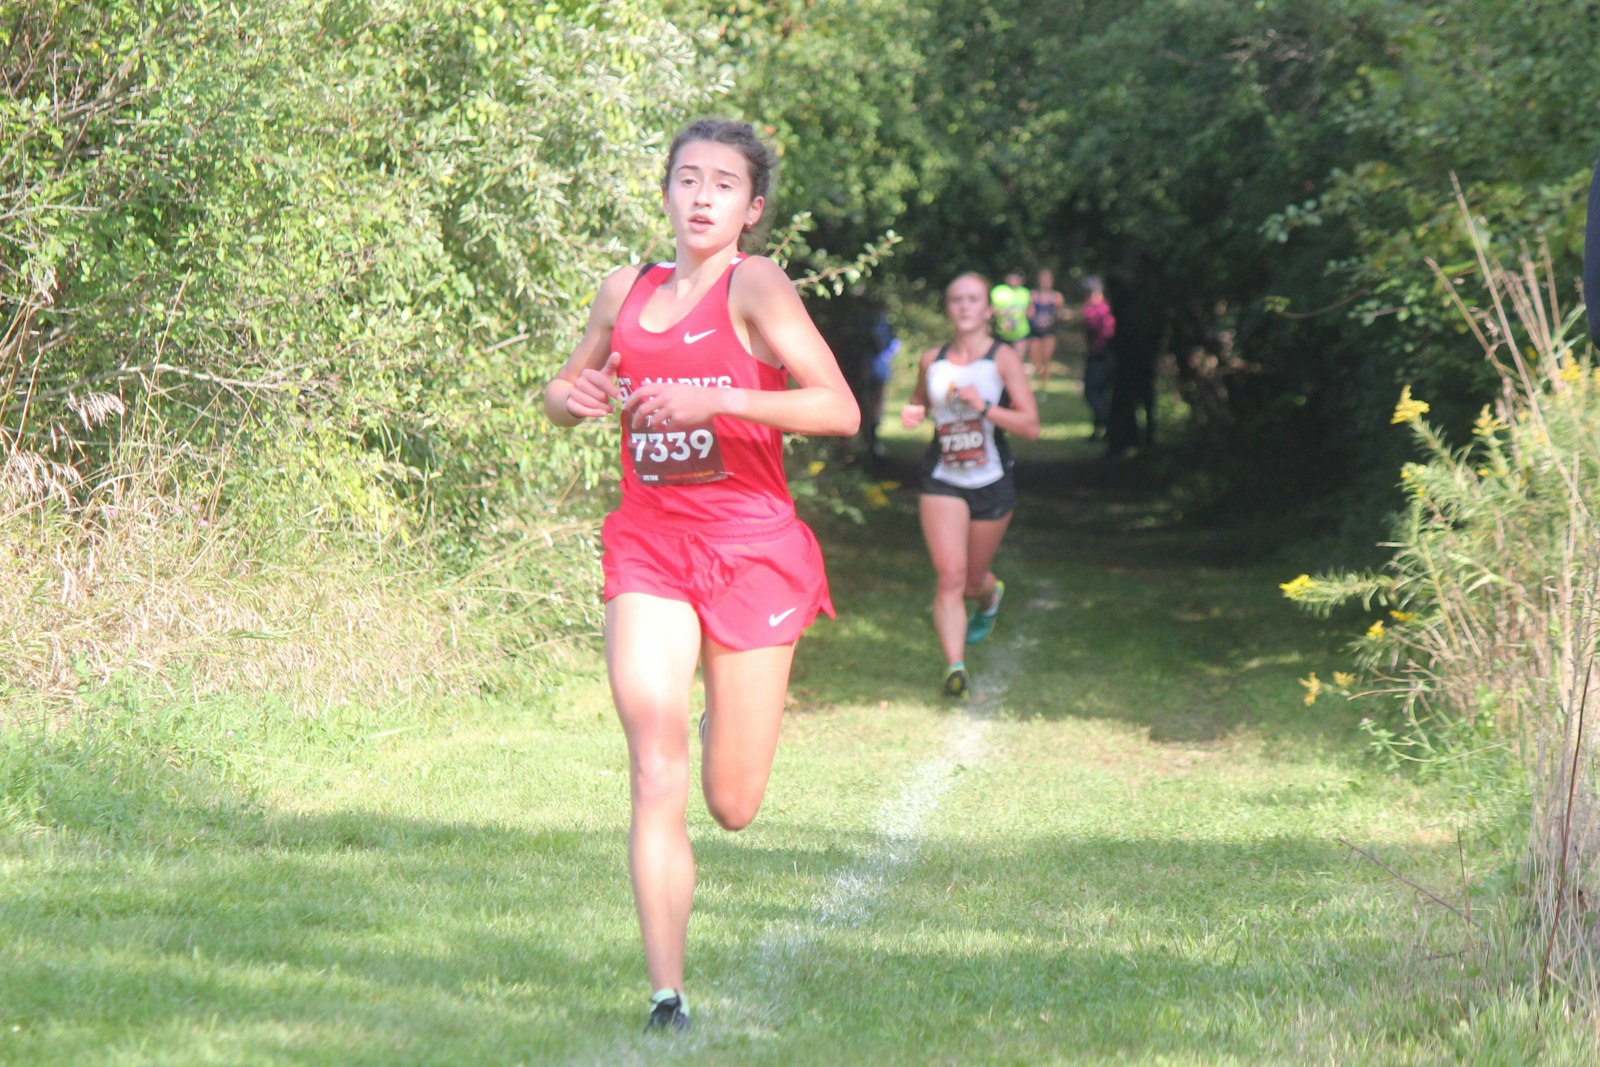 Near the mile mark, Orchard Lake St. Mary’s sophomore Mea D’Agostino begins to pull away from the pack. She won the 5-kilometer race in 20:00 flat.